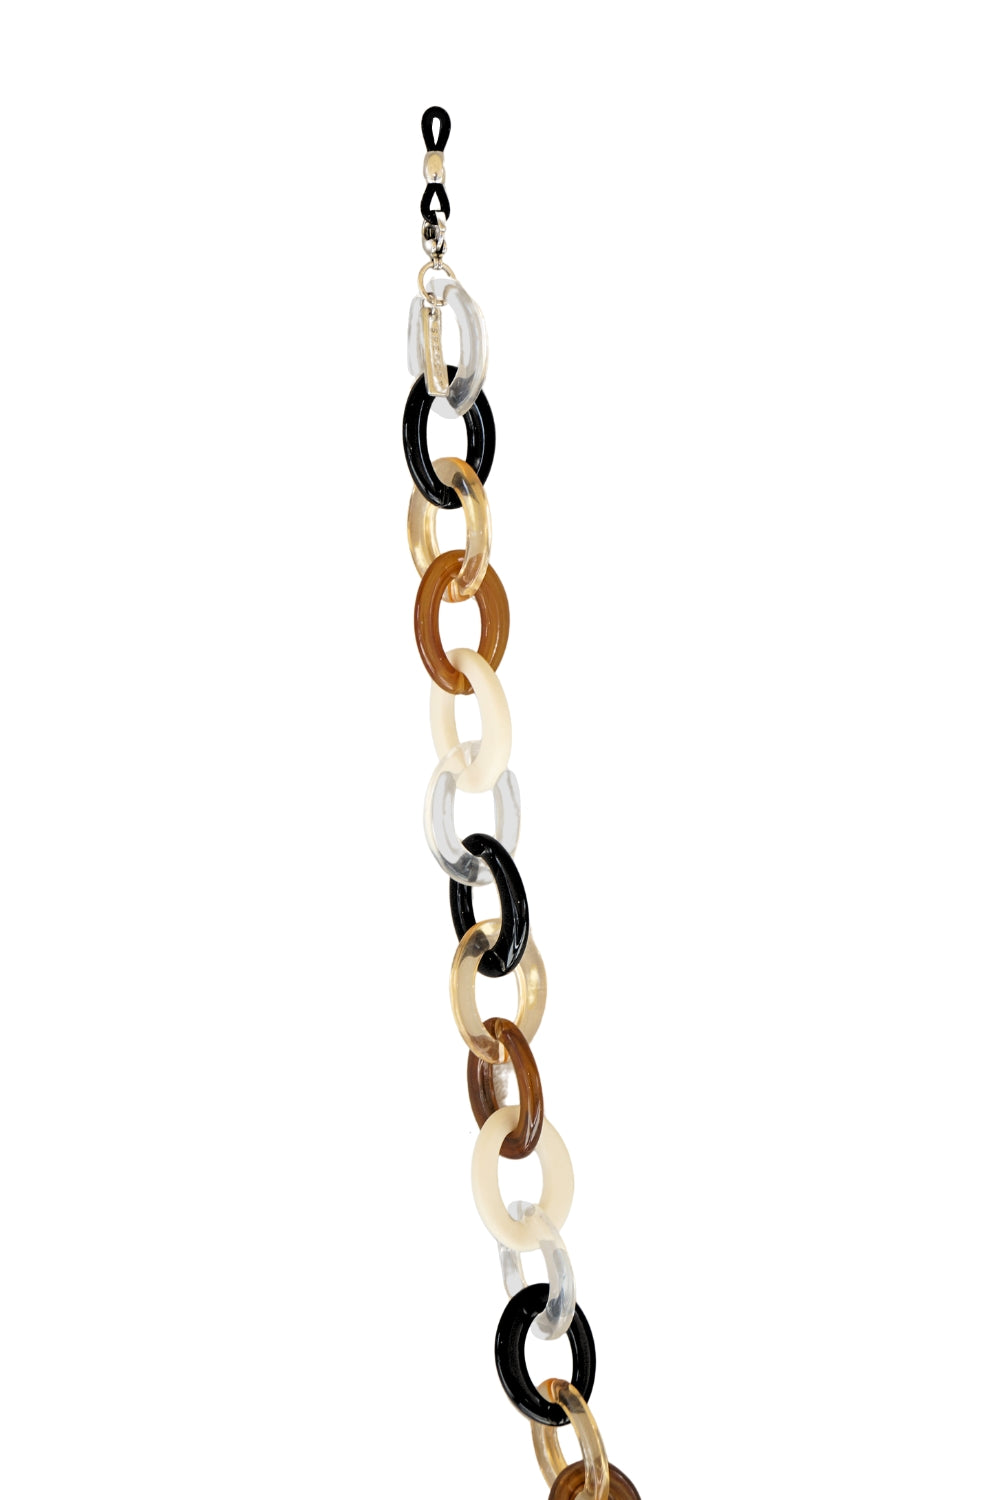 TREND BLEND - MULTICOLOR Chunky Eyewear Chain | SPECSET